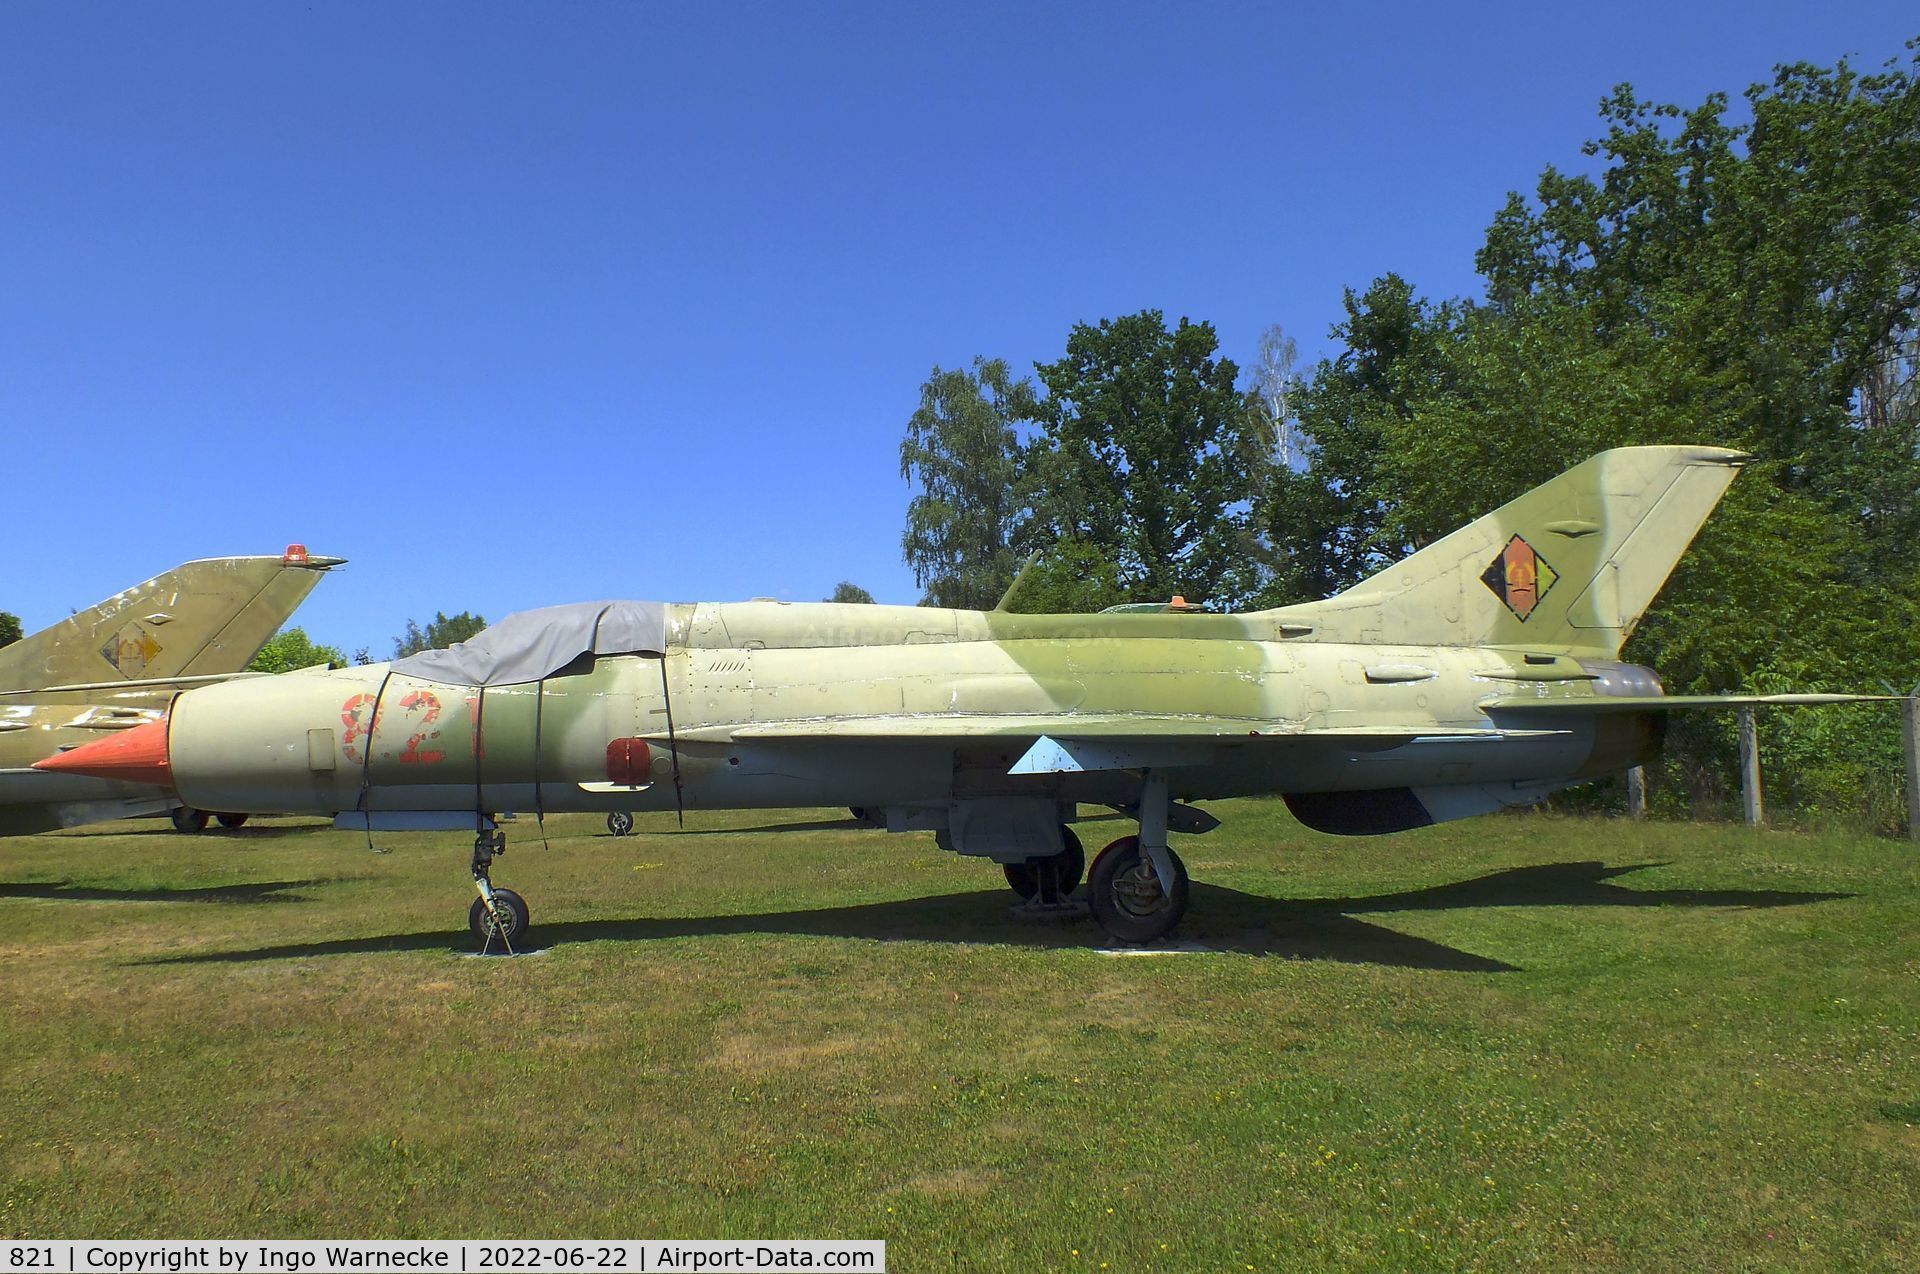 821, Mikoyan-Gurevich MiG-21PF C/N 0604, Mikoyan i Gurevich MiG-21PF (modified for east-german air force, locally called 'MiG-21PFM') FISHBED-D at the Flugplatzmuseum Cottbus (Cottbus airfield museum)